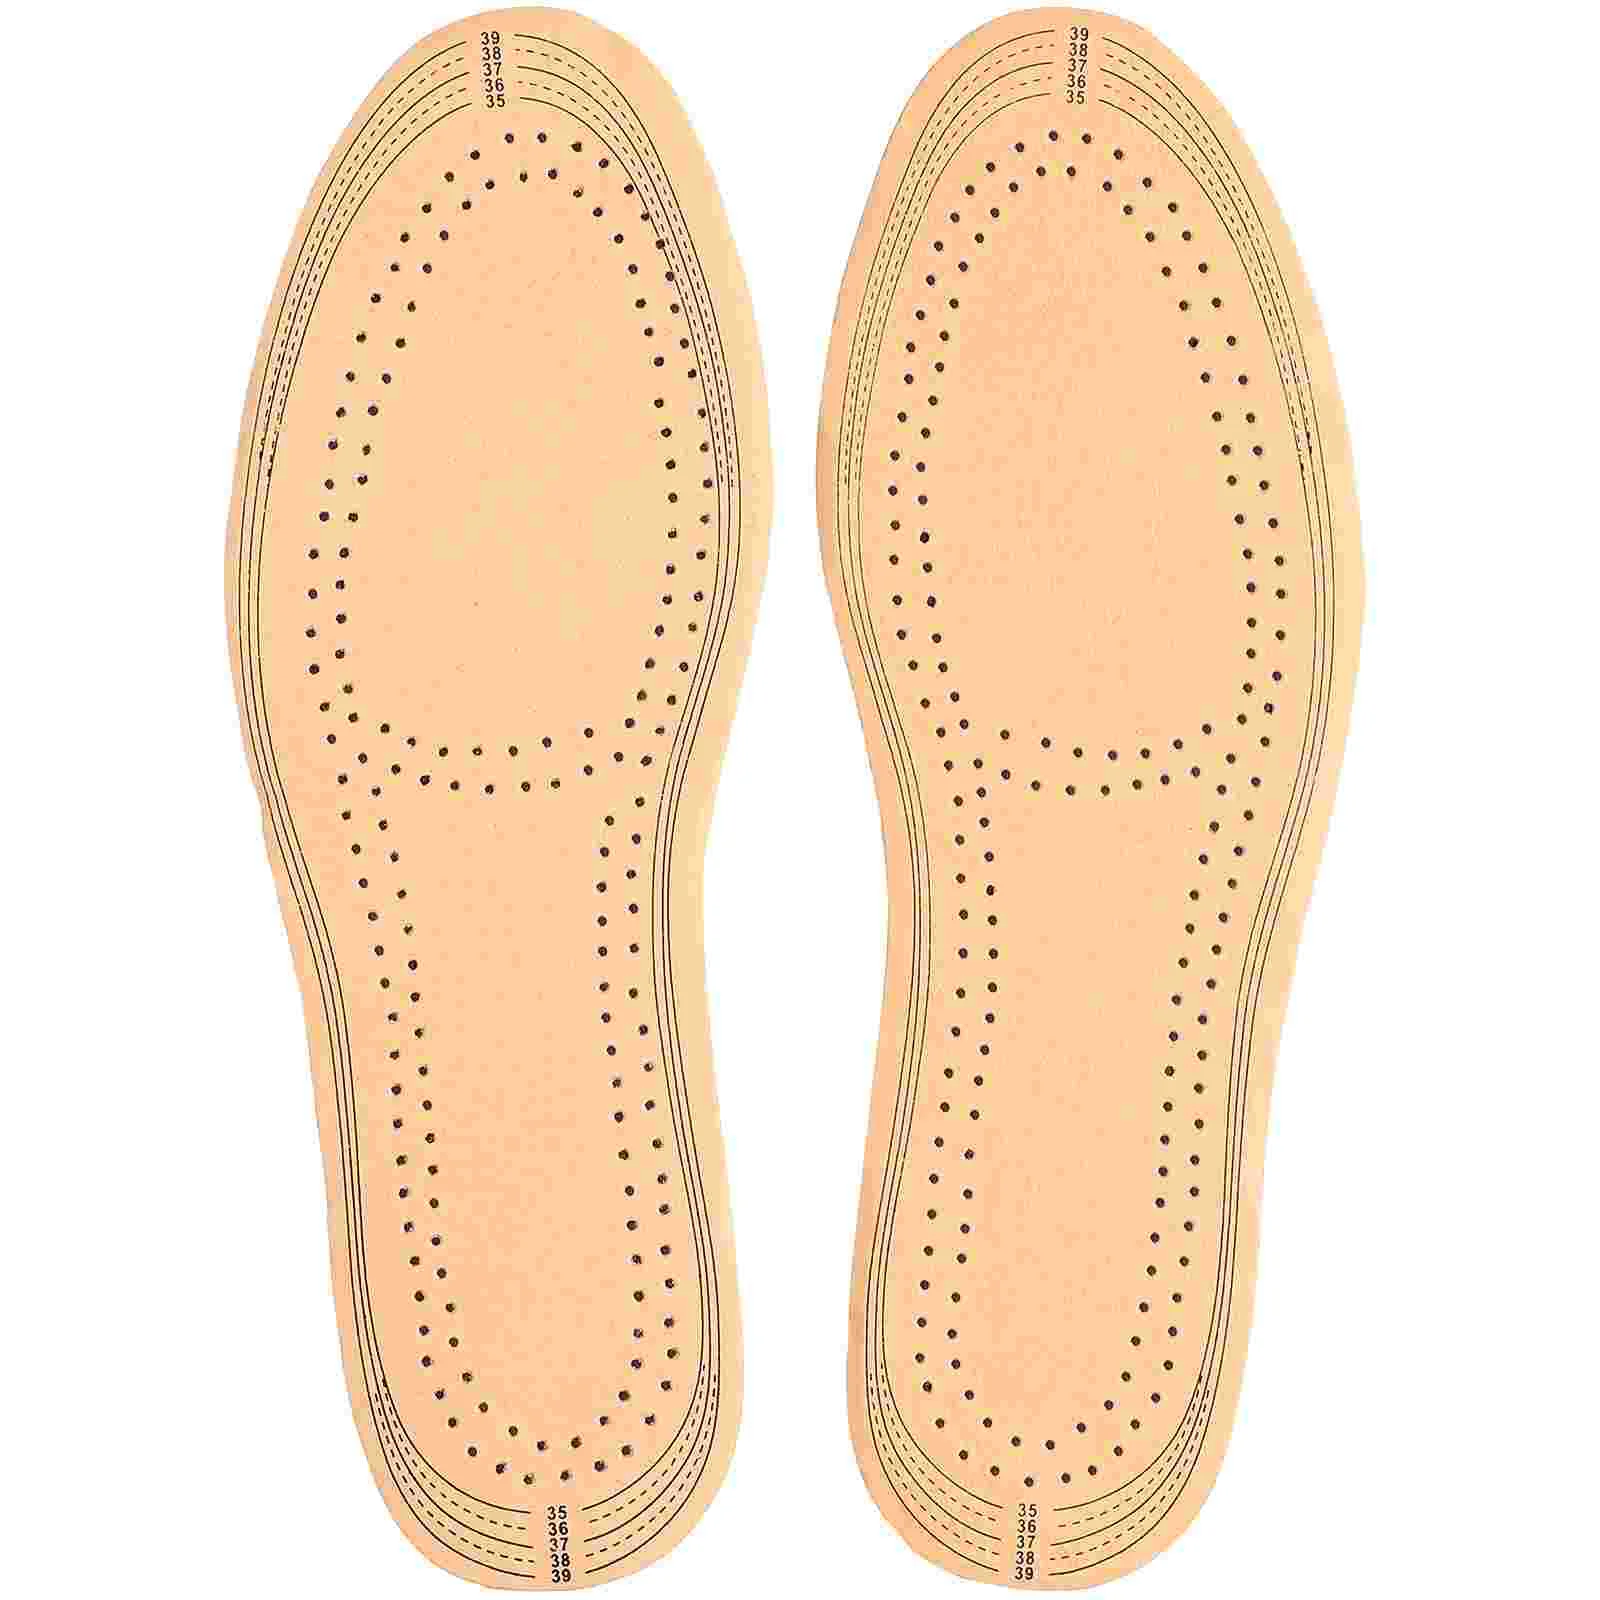 

Shoe Inserts for Men Breathable Insoles Pigskin Absorb Sweat Ultra Thin